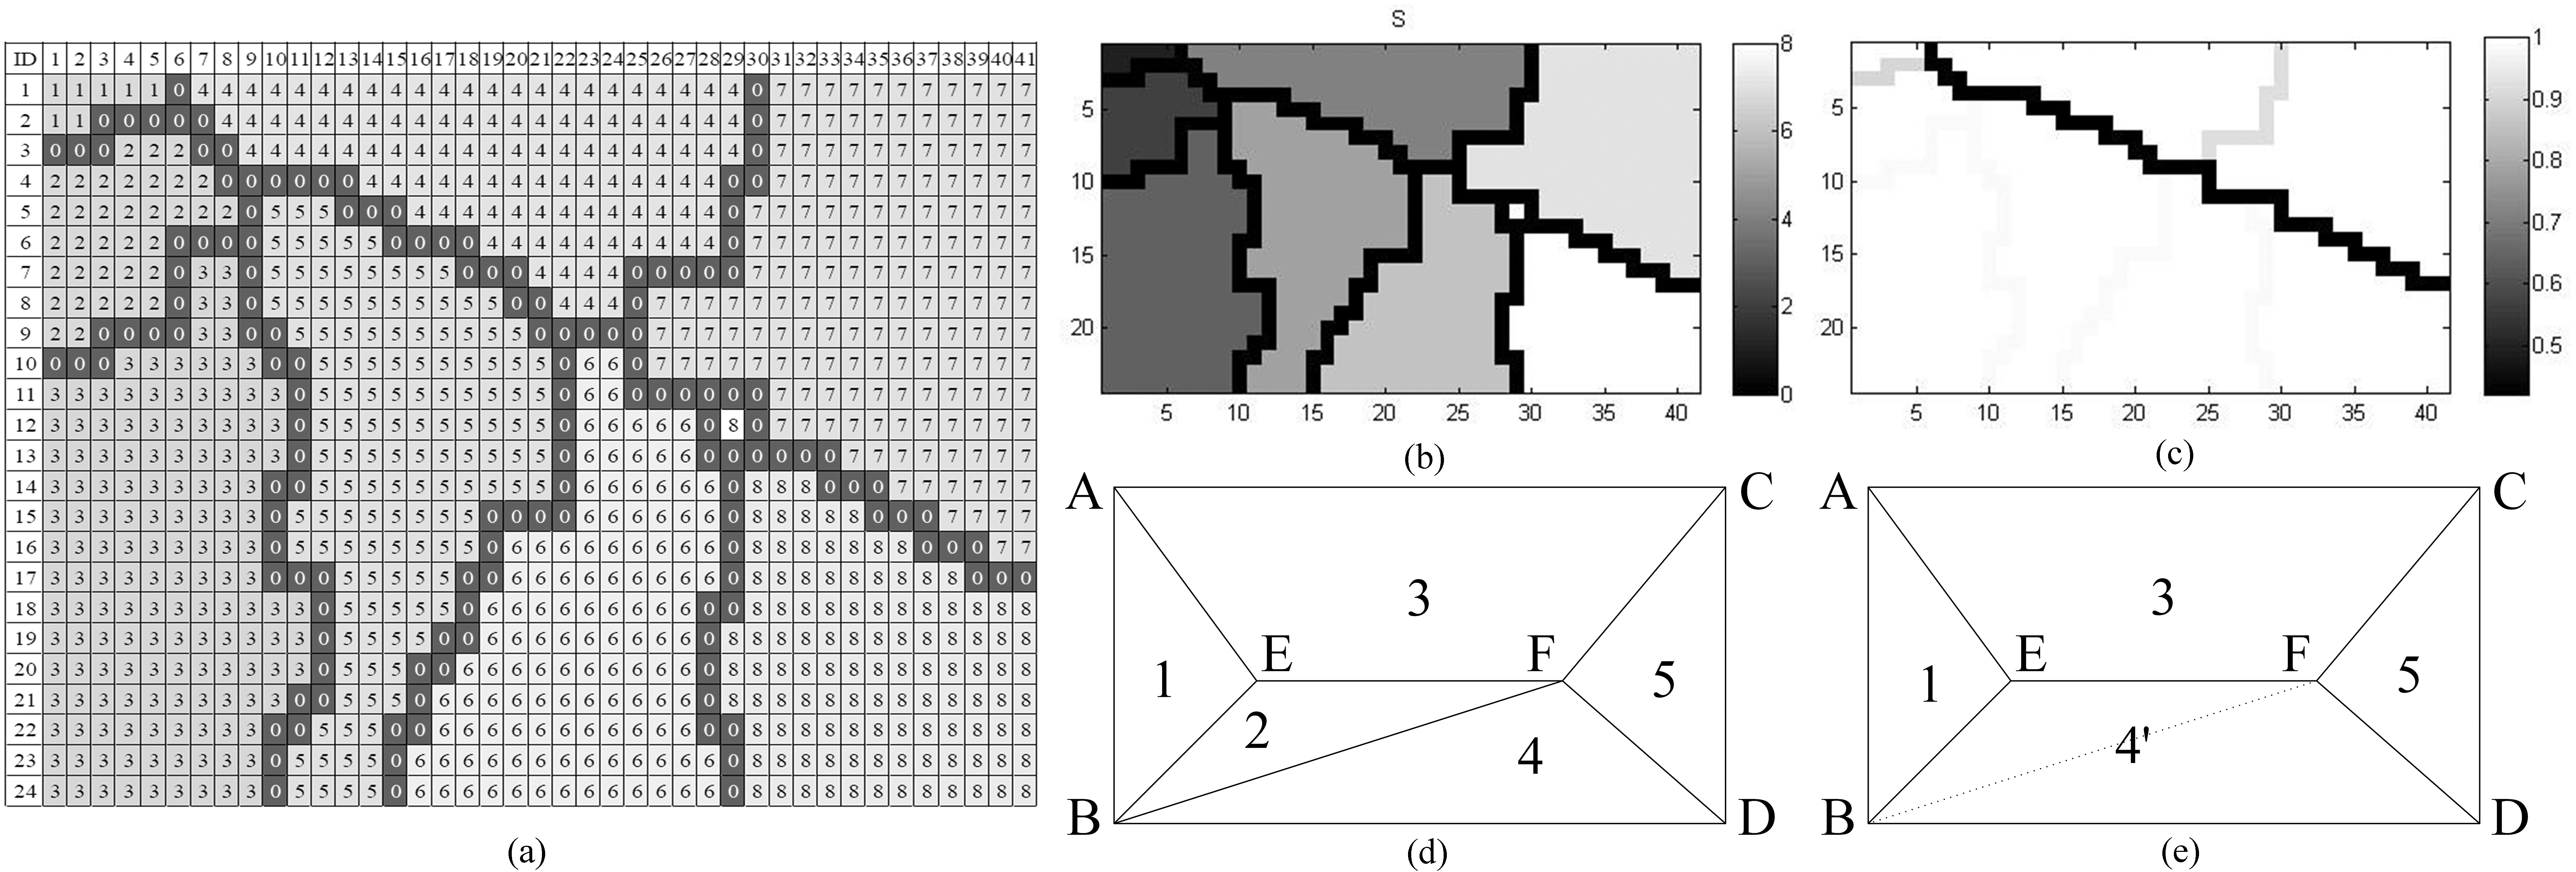 The process of merging the SLIC super-pixels: (a) the labeled slice of the given CT image; (b) the cluster labels before merging; (c) the labels after merging; (d) and (e) the sketch for (b) and (c).